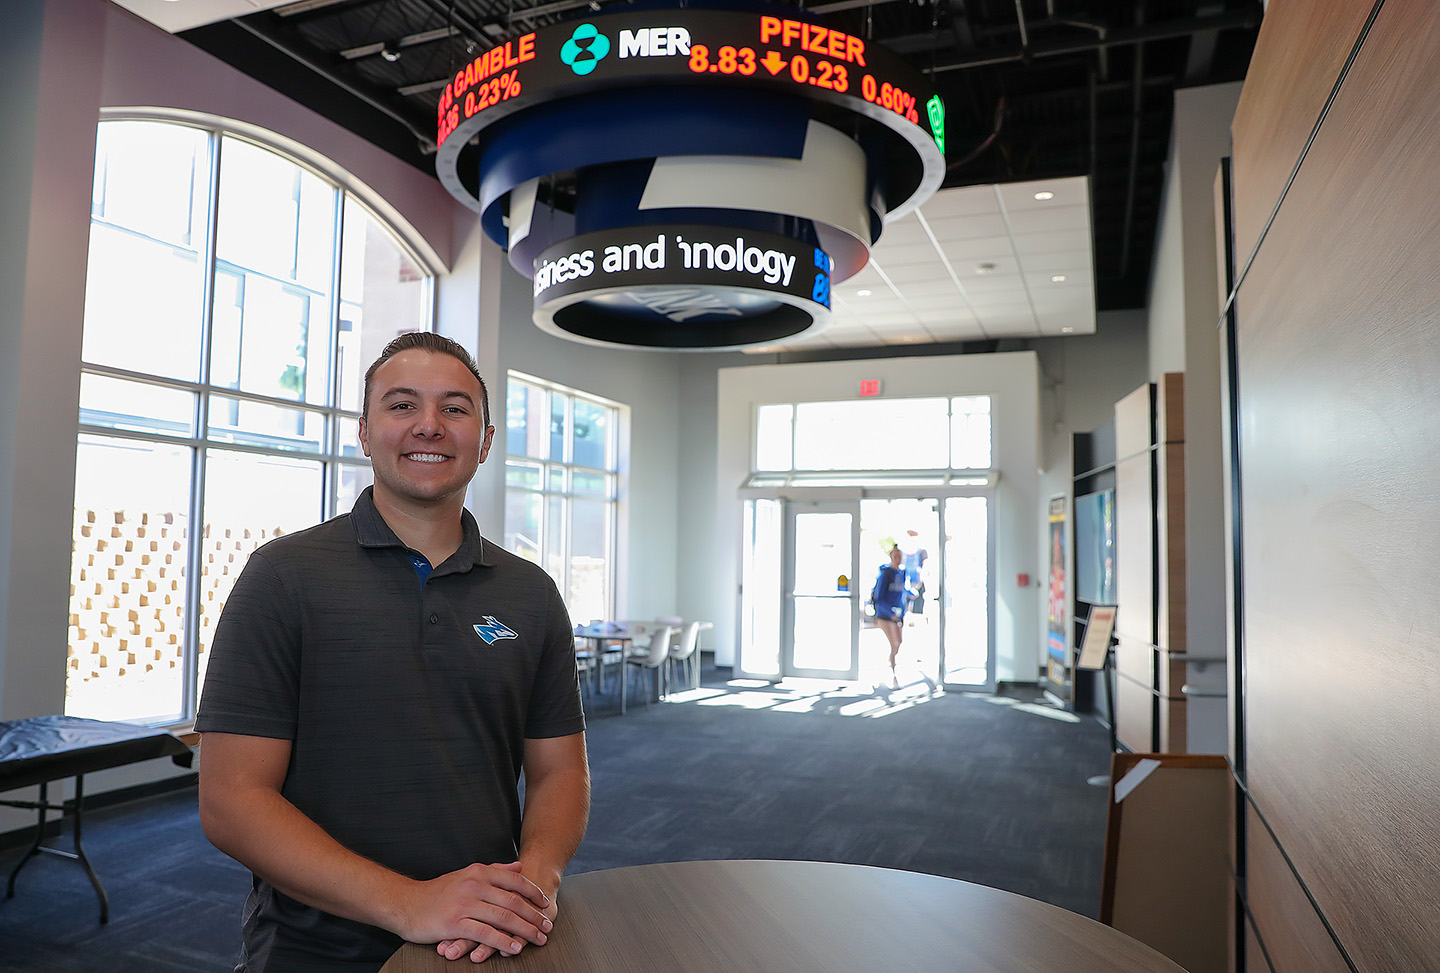 Jack Mohr graduates Friday with degrees in sports management and business administration with a marketing emphasis. He’ll represent the College of Business and Technology as a gonfalonier during the commencement ceremony.